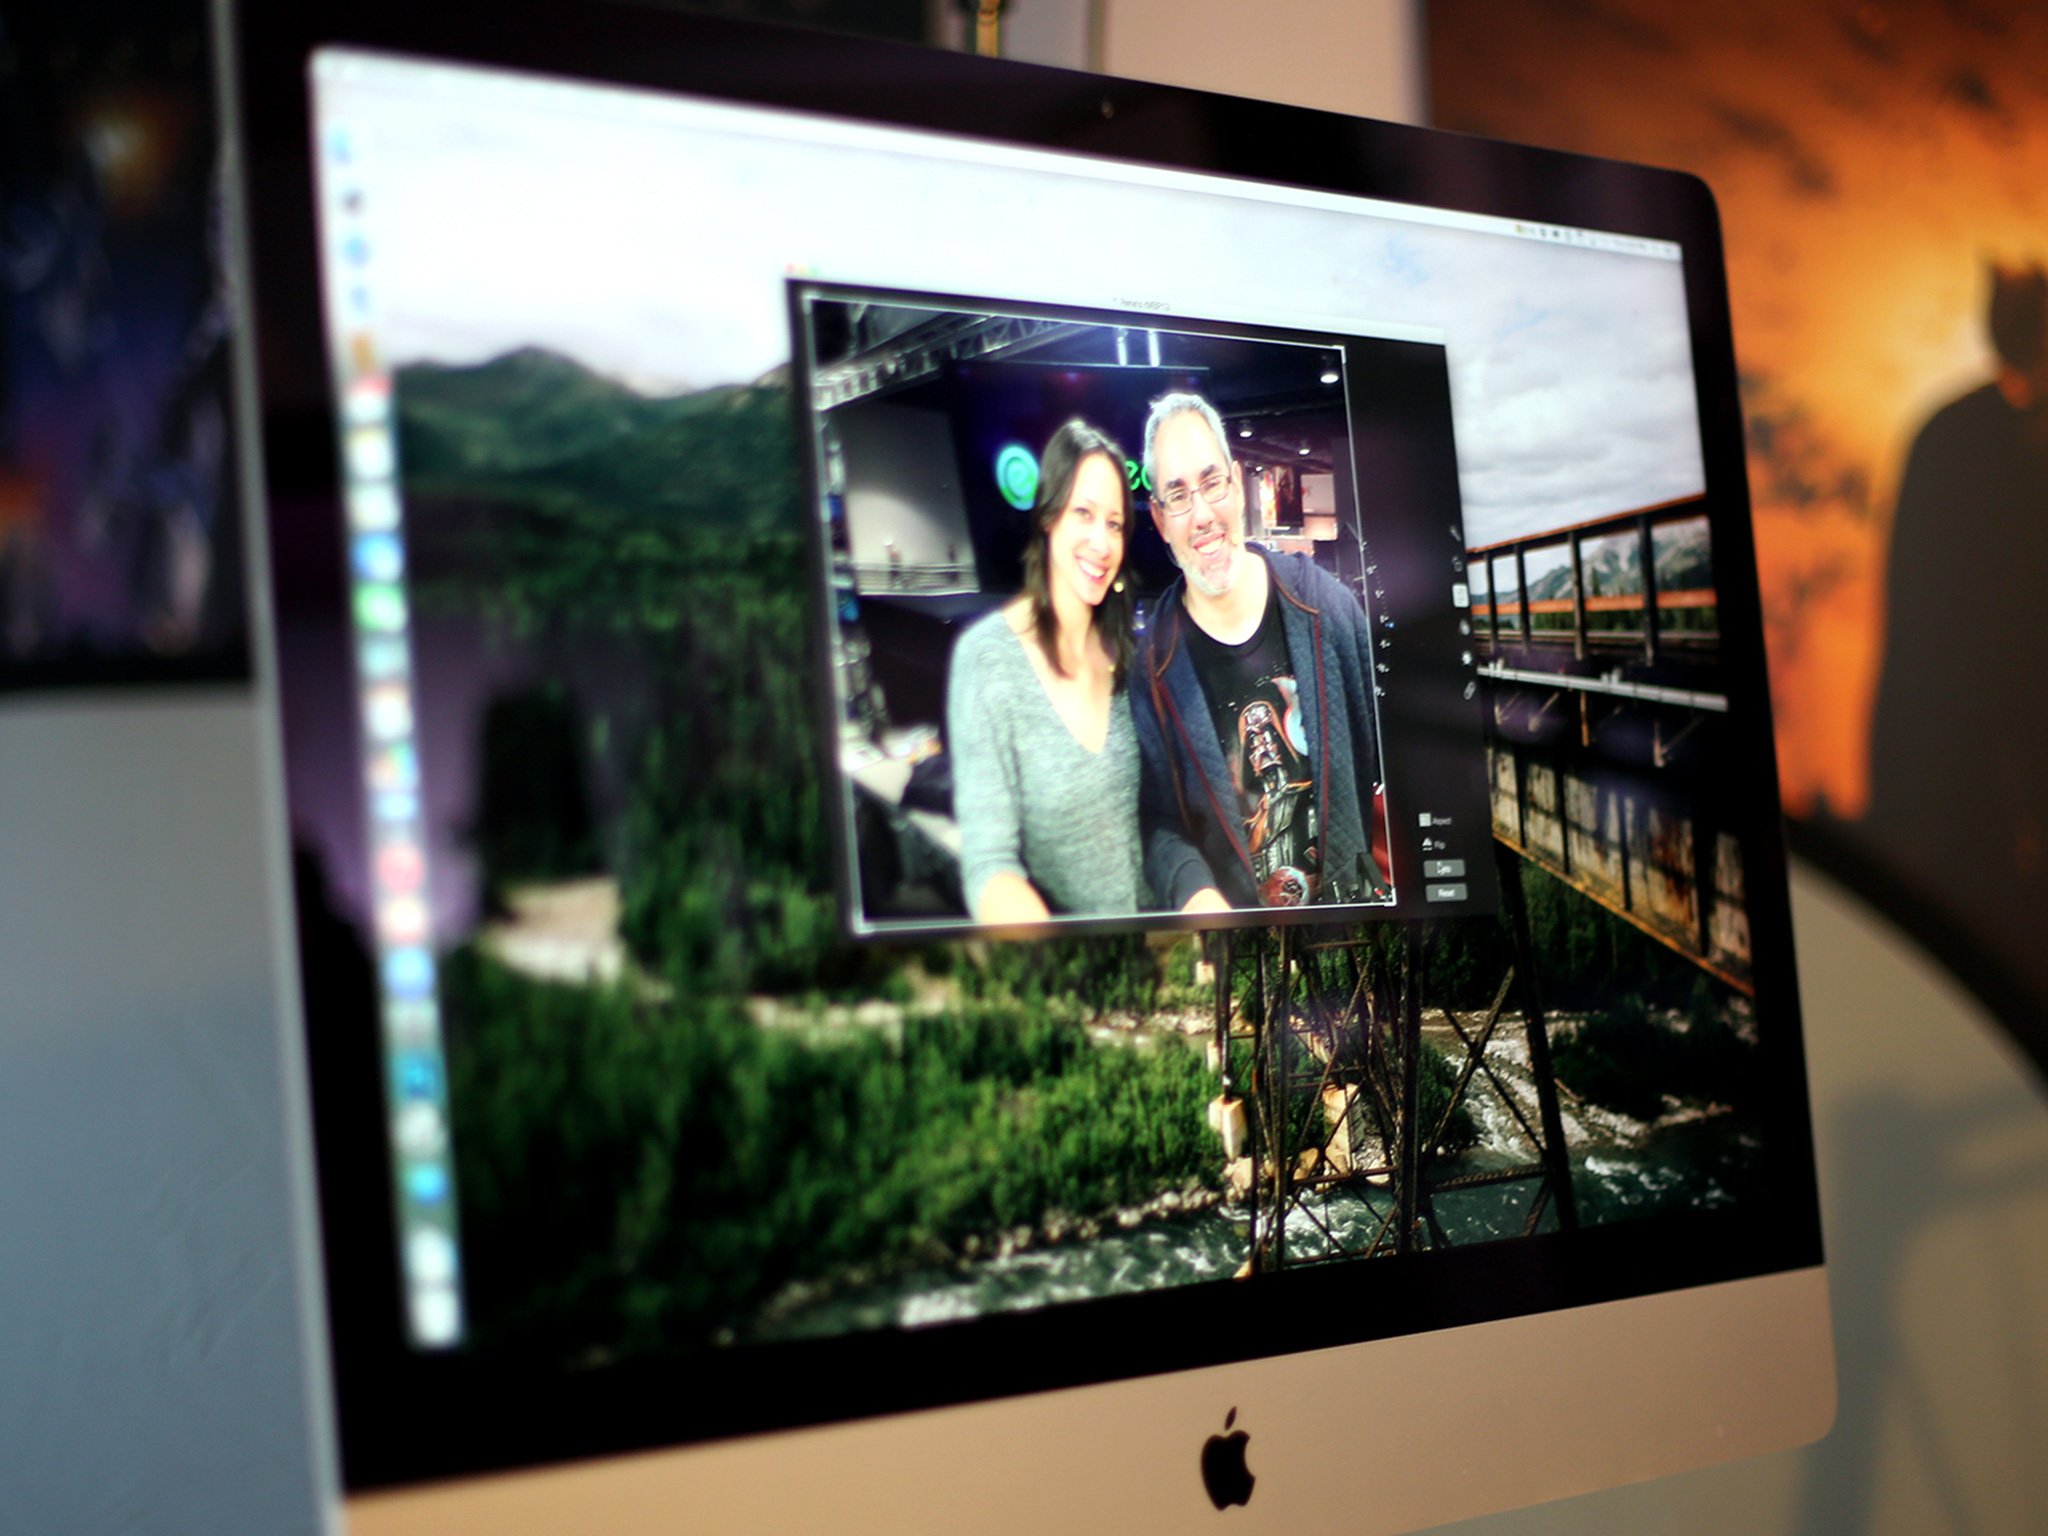 Photos for OS X: One week later